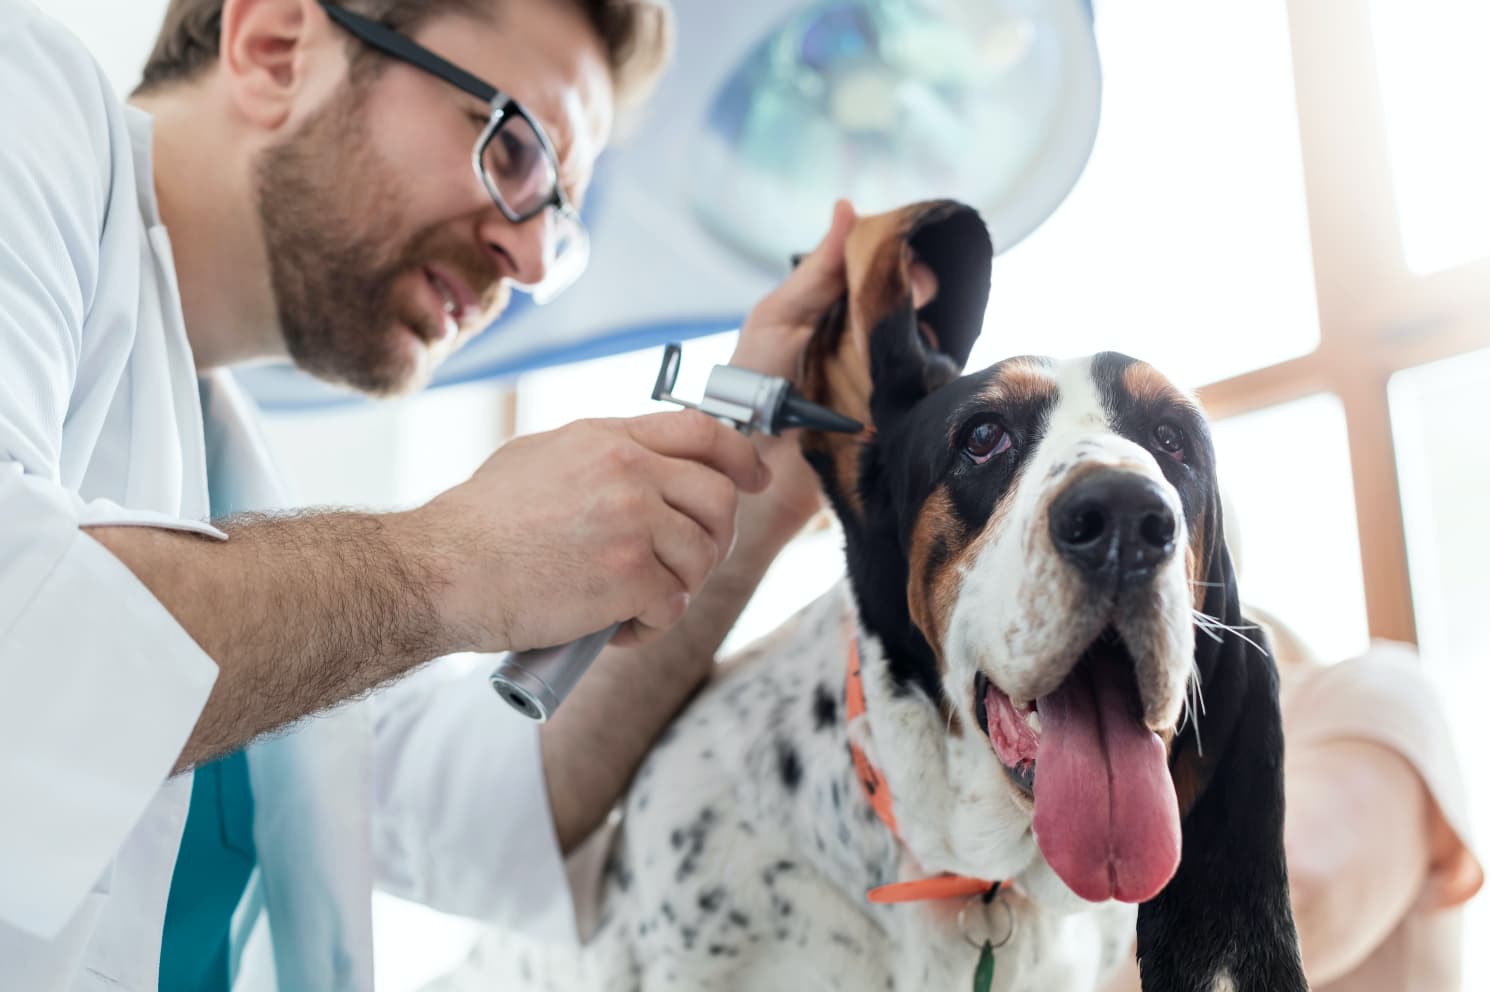 Ear Mites in Dogs